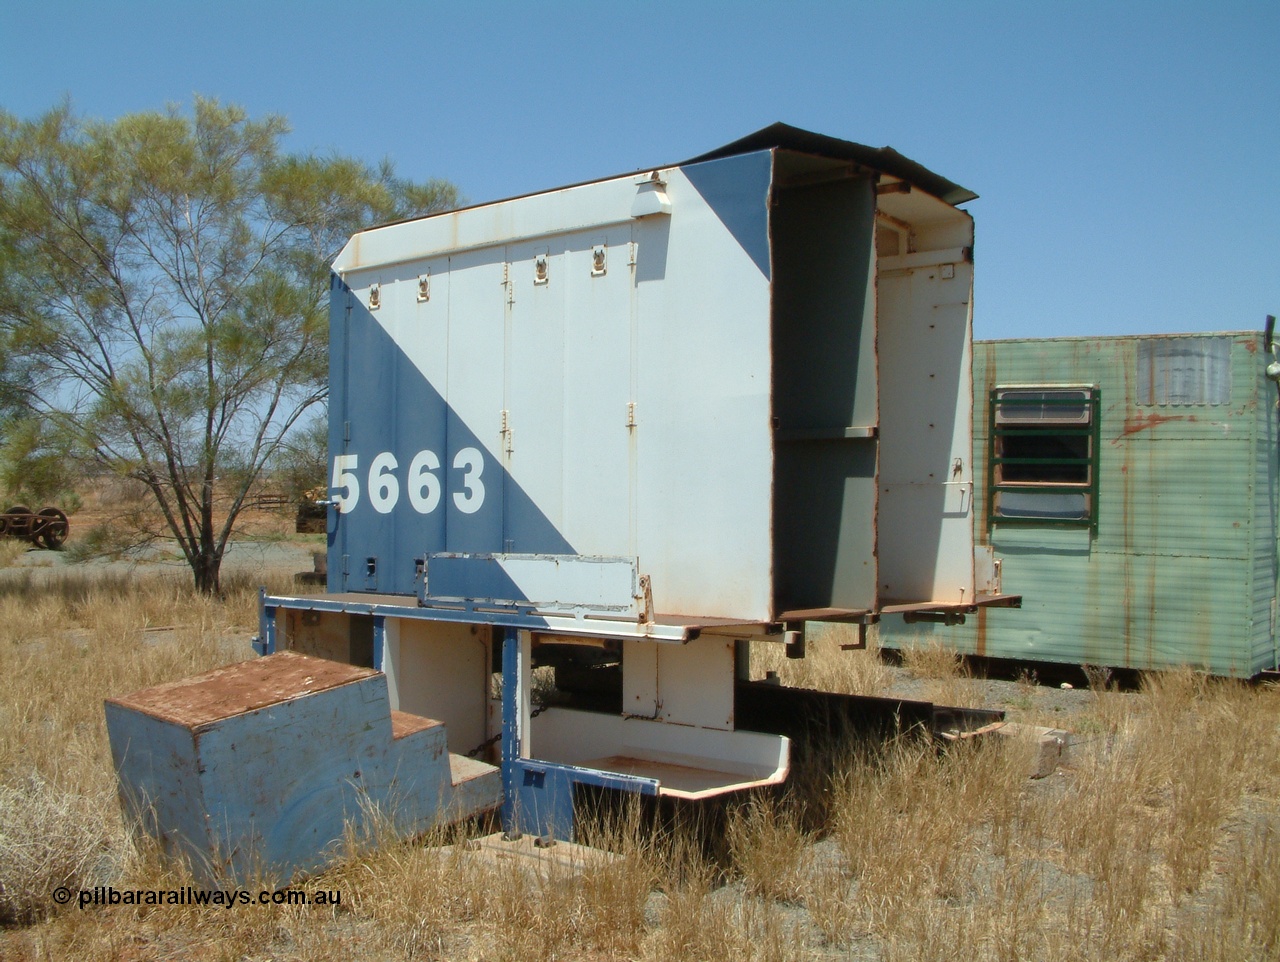 041014 122920
Pilbara Railways Historical Society, the Locotrol 'cab' from Goninan WA rebuild CM40-8ML unit 5663 Newcastle, one of three units built without a driving cab in 1994 but with a Locotrol equipment cabinet to do away with the Locotrol waggons that were in use at the time. Eventually the three locomotives had driving cabs fitted. Donated to the Society around 1998? 14th October 2004.
Keywords: 5663;Goninan;GE;CM40-8ML;8412-08/94-154;rebuild;AE-Goodwin;ALCo;M636C;5476;G6047-8